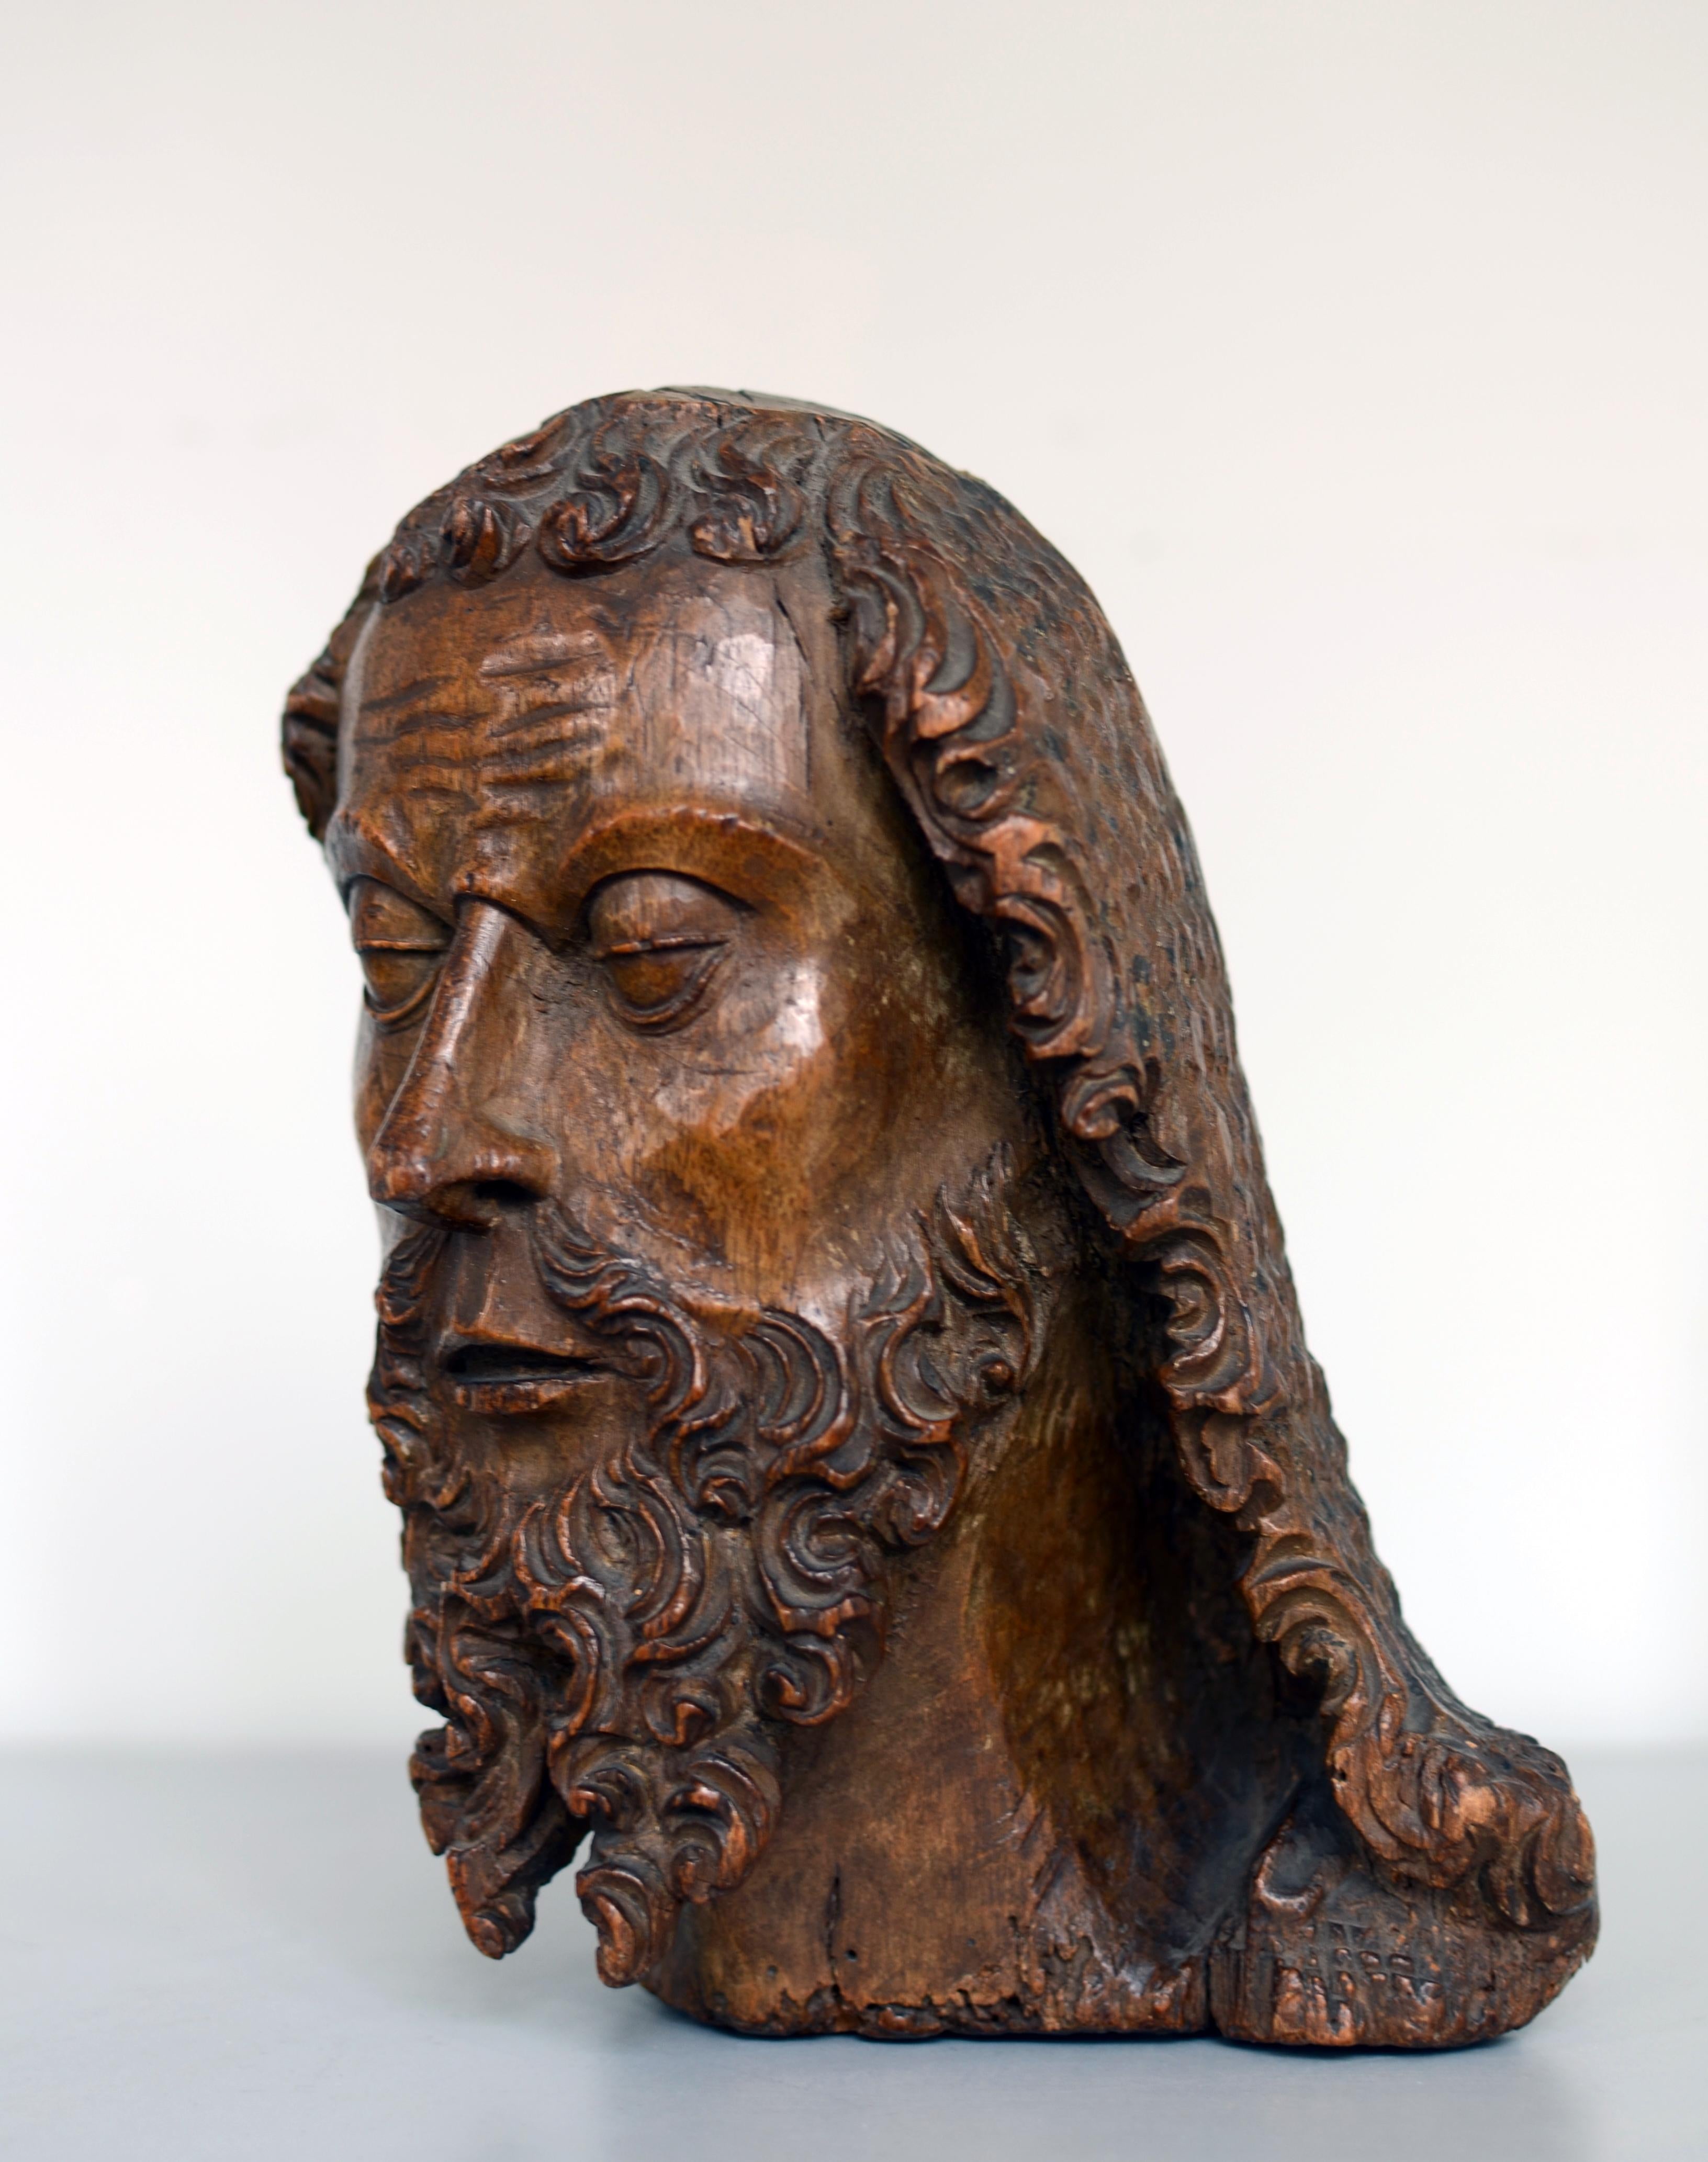 A High Gothic bust of a bearded saint
Sphere of Simon de Colonia or Lorenzo Mercadante de Bretaña; 15th century
Walnut; approximate size: 23 cm (h)

The present bust of a saint, probably John the Baptist, can be linked to the workmanship of a